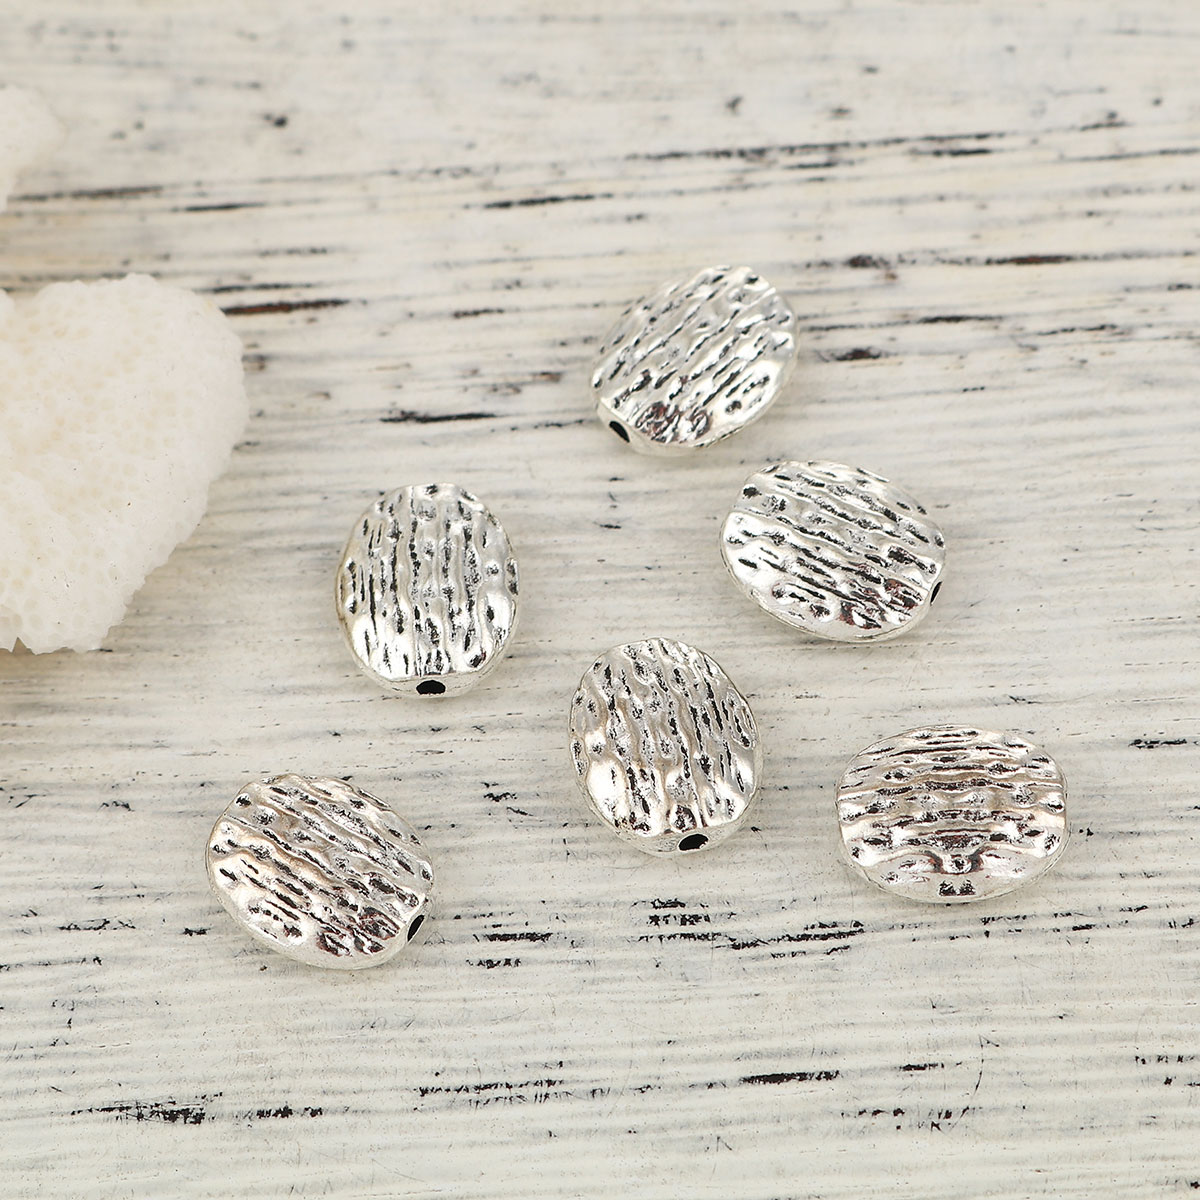 Picture of Zinc Based Alloy Spacer Beads Oval Antique Silver 13mm x 11mm, Hole: Approx 1.6mm, 30 PCs